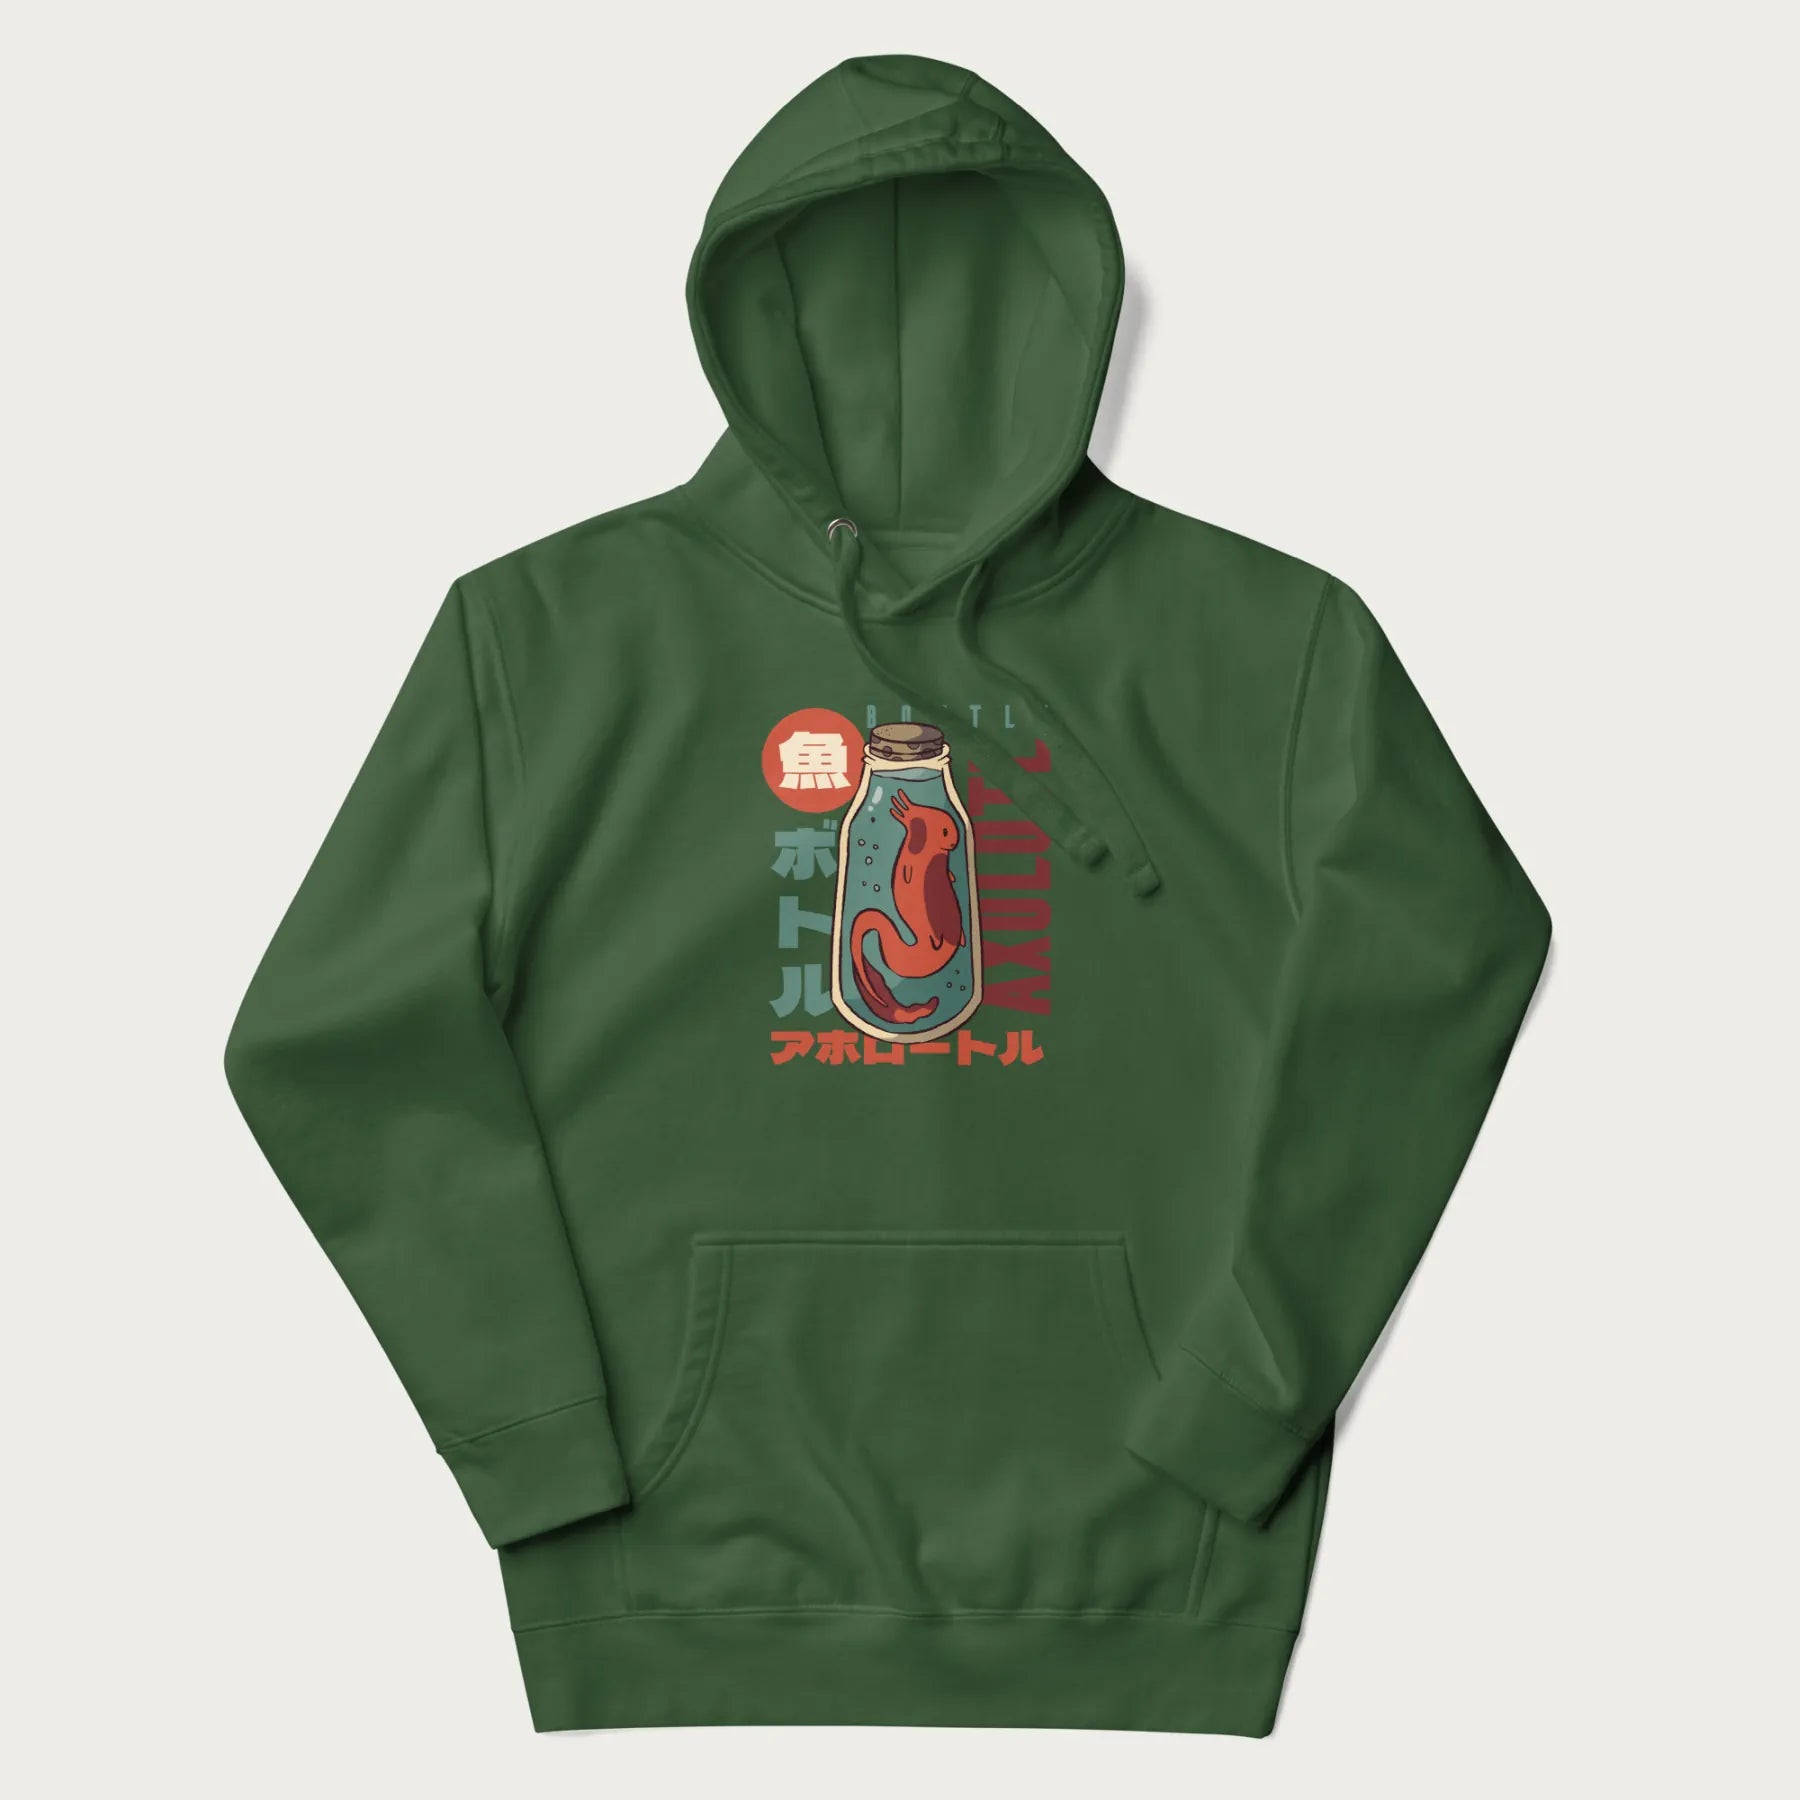 Forest green hoodie with Japanese graphic of a red axolotl in a bottle with Japanese text 'ボトル' (Bottle) and 'アホロートル' (Axolotl).